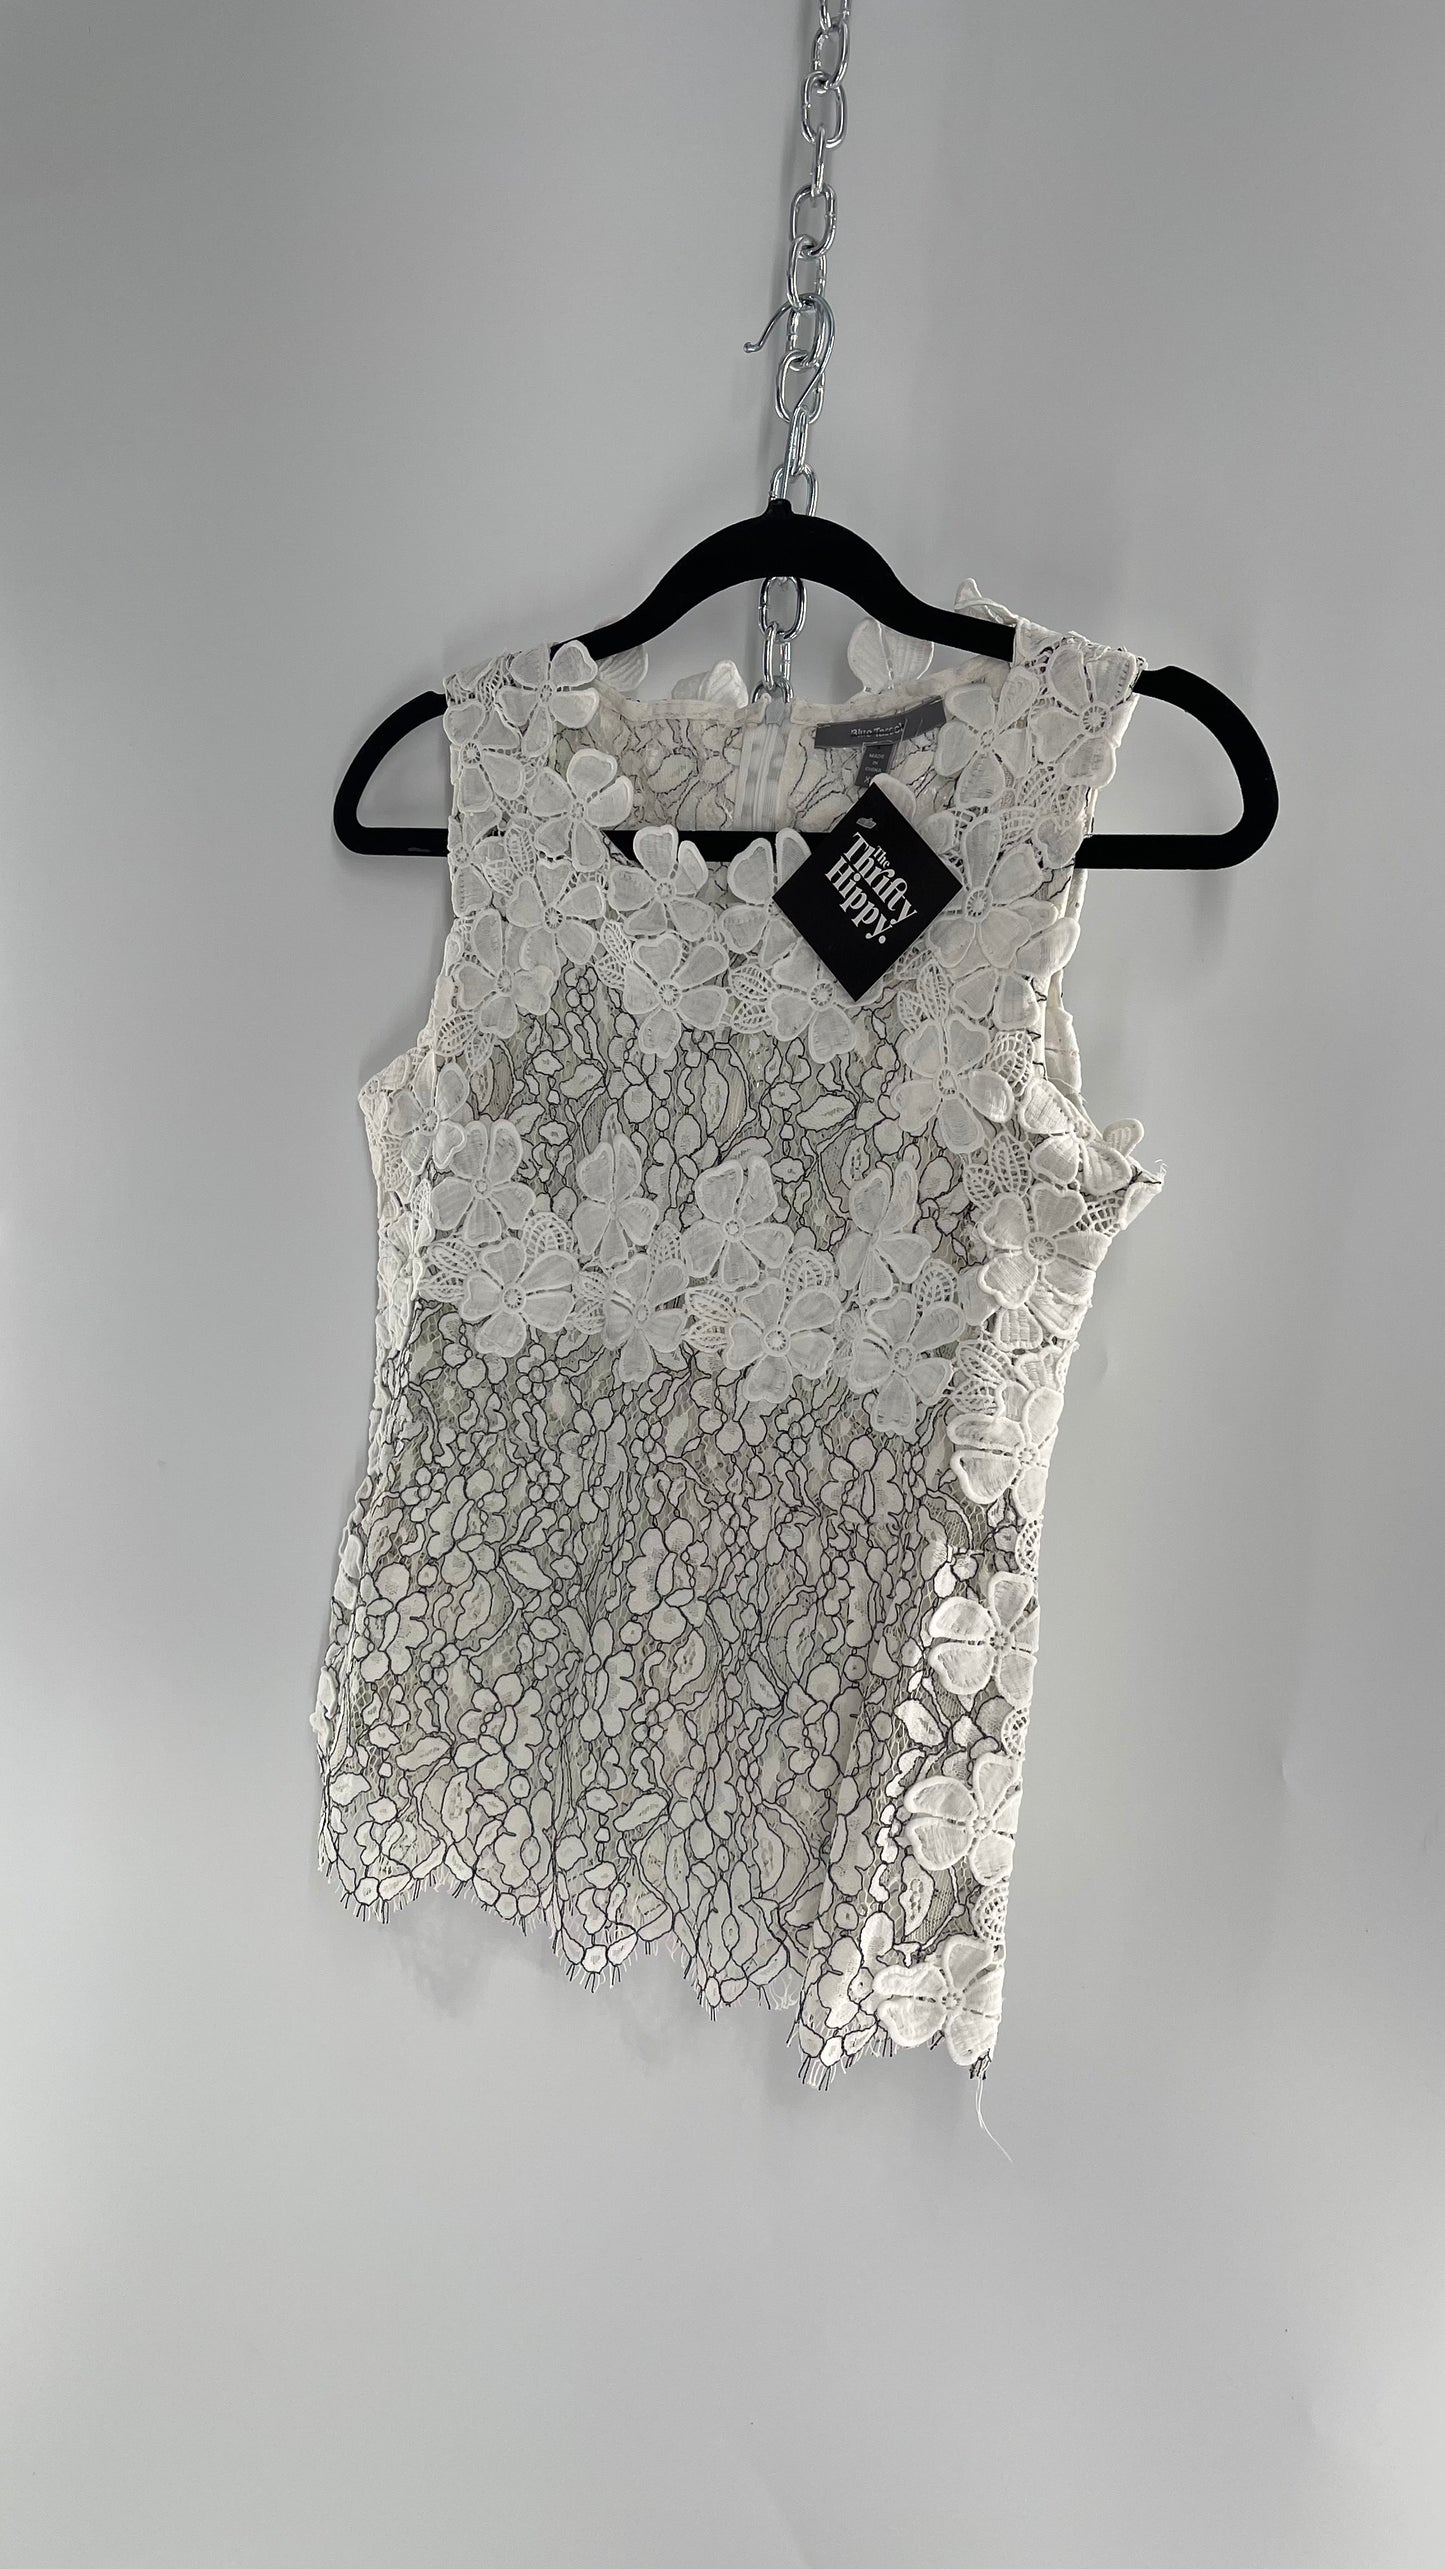 Anthropologie Blue Tassel White Lace Tank with White Lace Under bust and Collar Trim (XS)